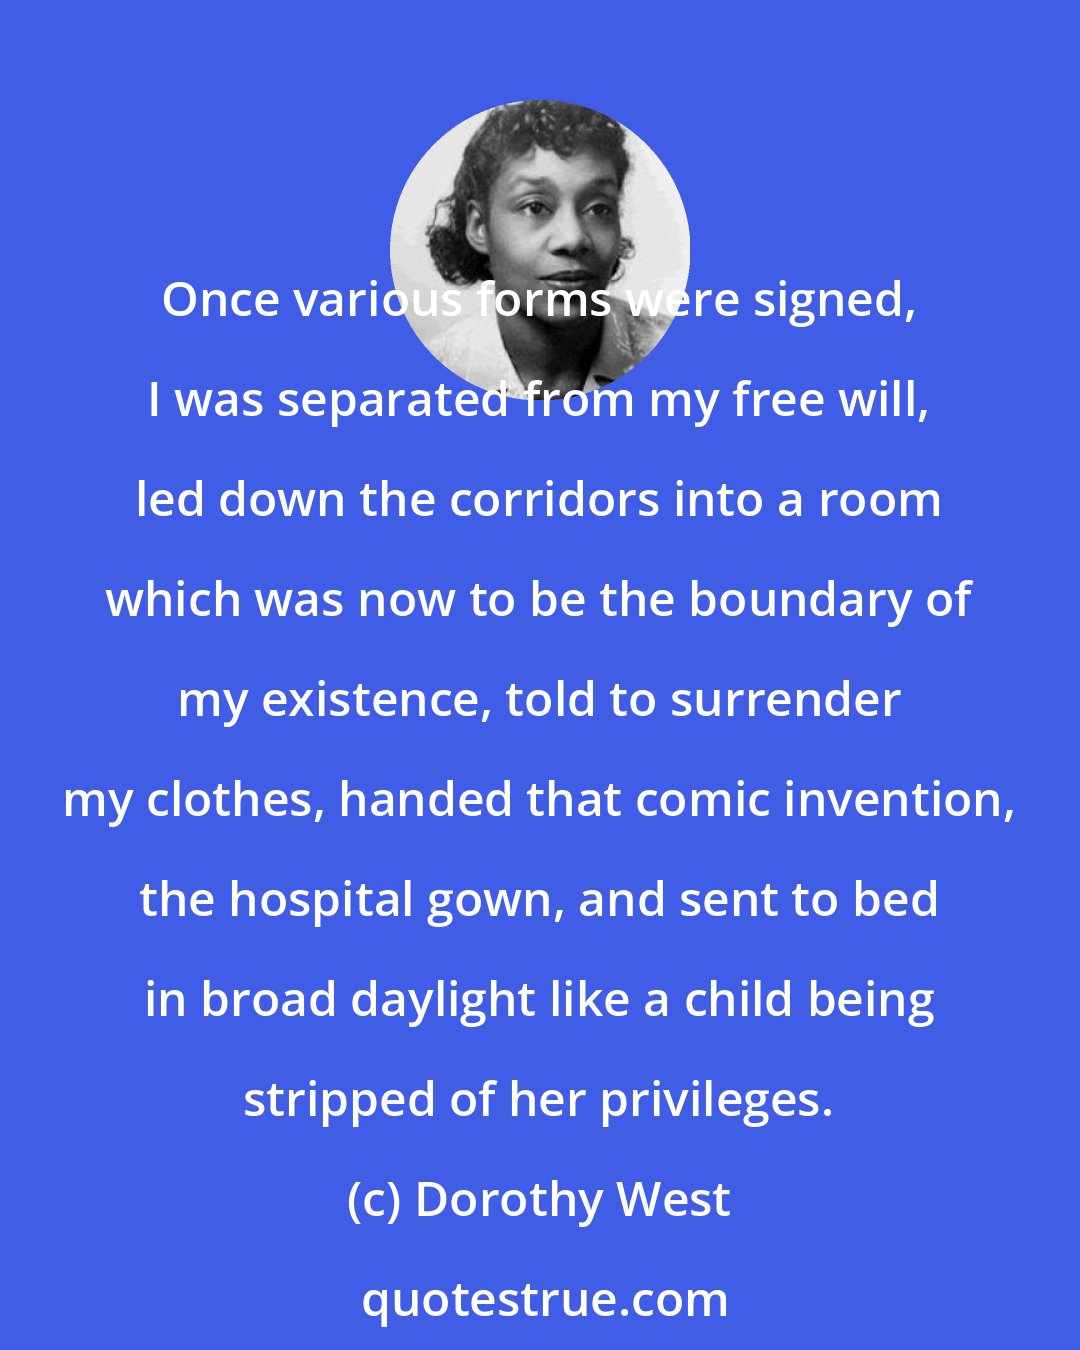 Dorothy West: Once various forms were signed, I was separated from my free will, led down the corridors into a room which was now to be the boundary of my existence, told to surrender my clothes, handed that comic invention, the hospital gown, and sent to bed in broad daylight like a child being stripped of her privileges.